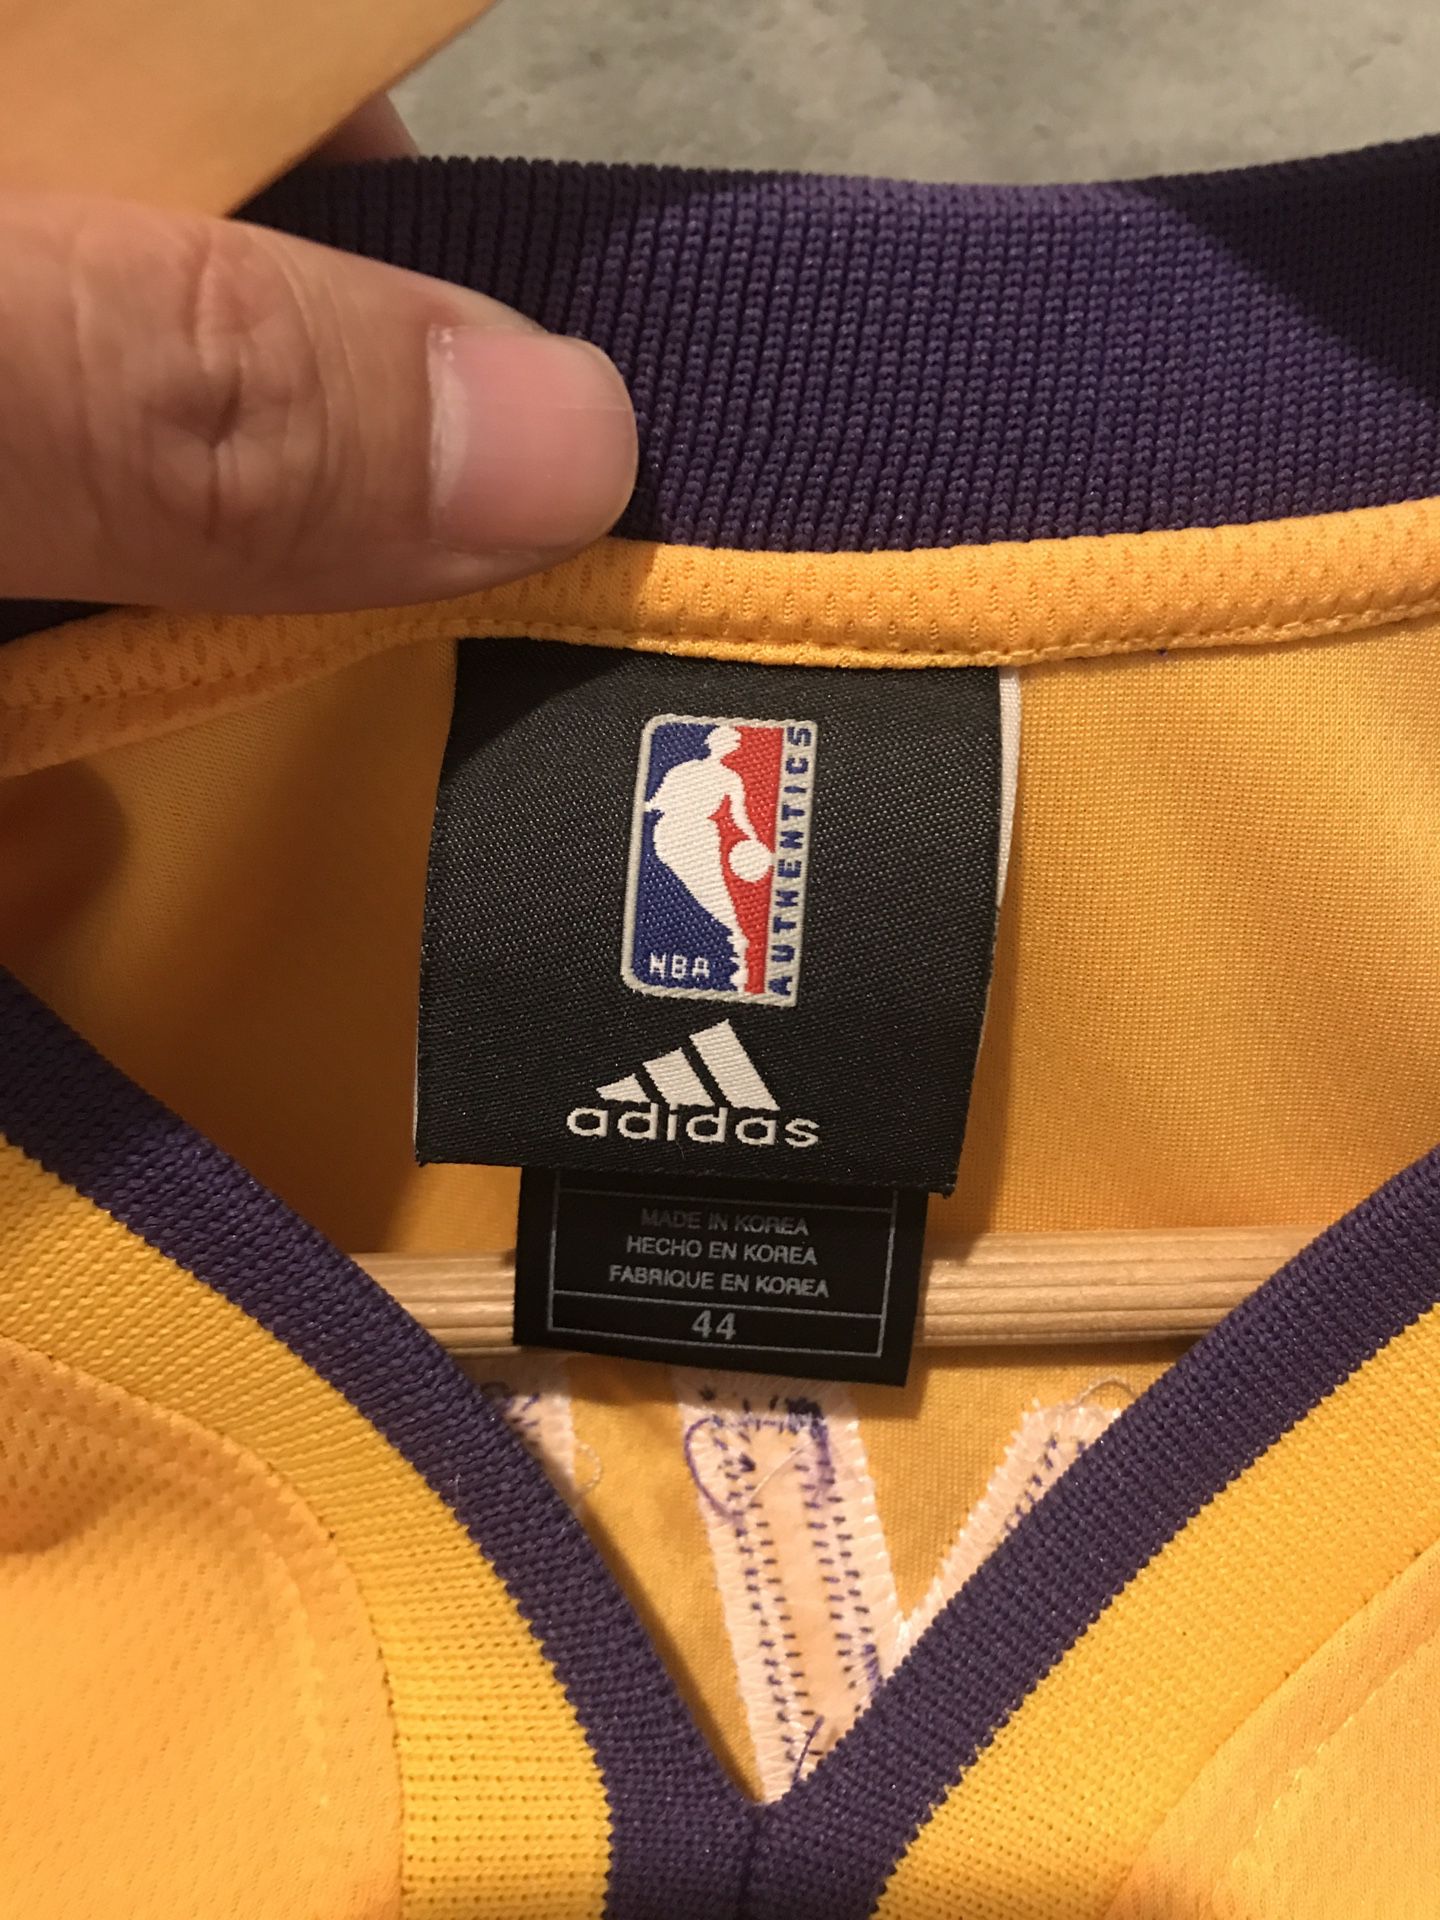 Adidas Hardwood Classics Kobe Bryant Lakers Rookie Jersey for Sale in  Culver City, CA - OfferUp